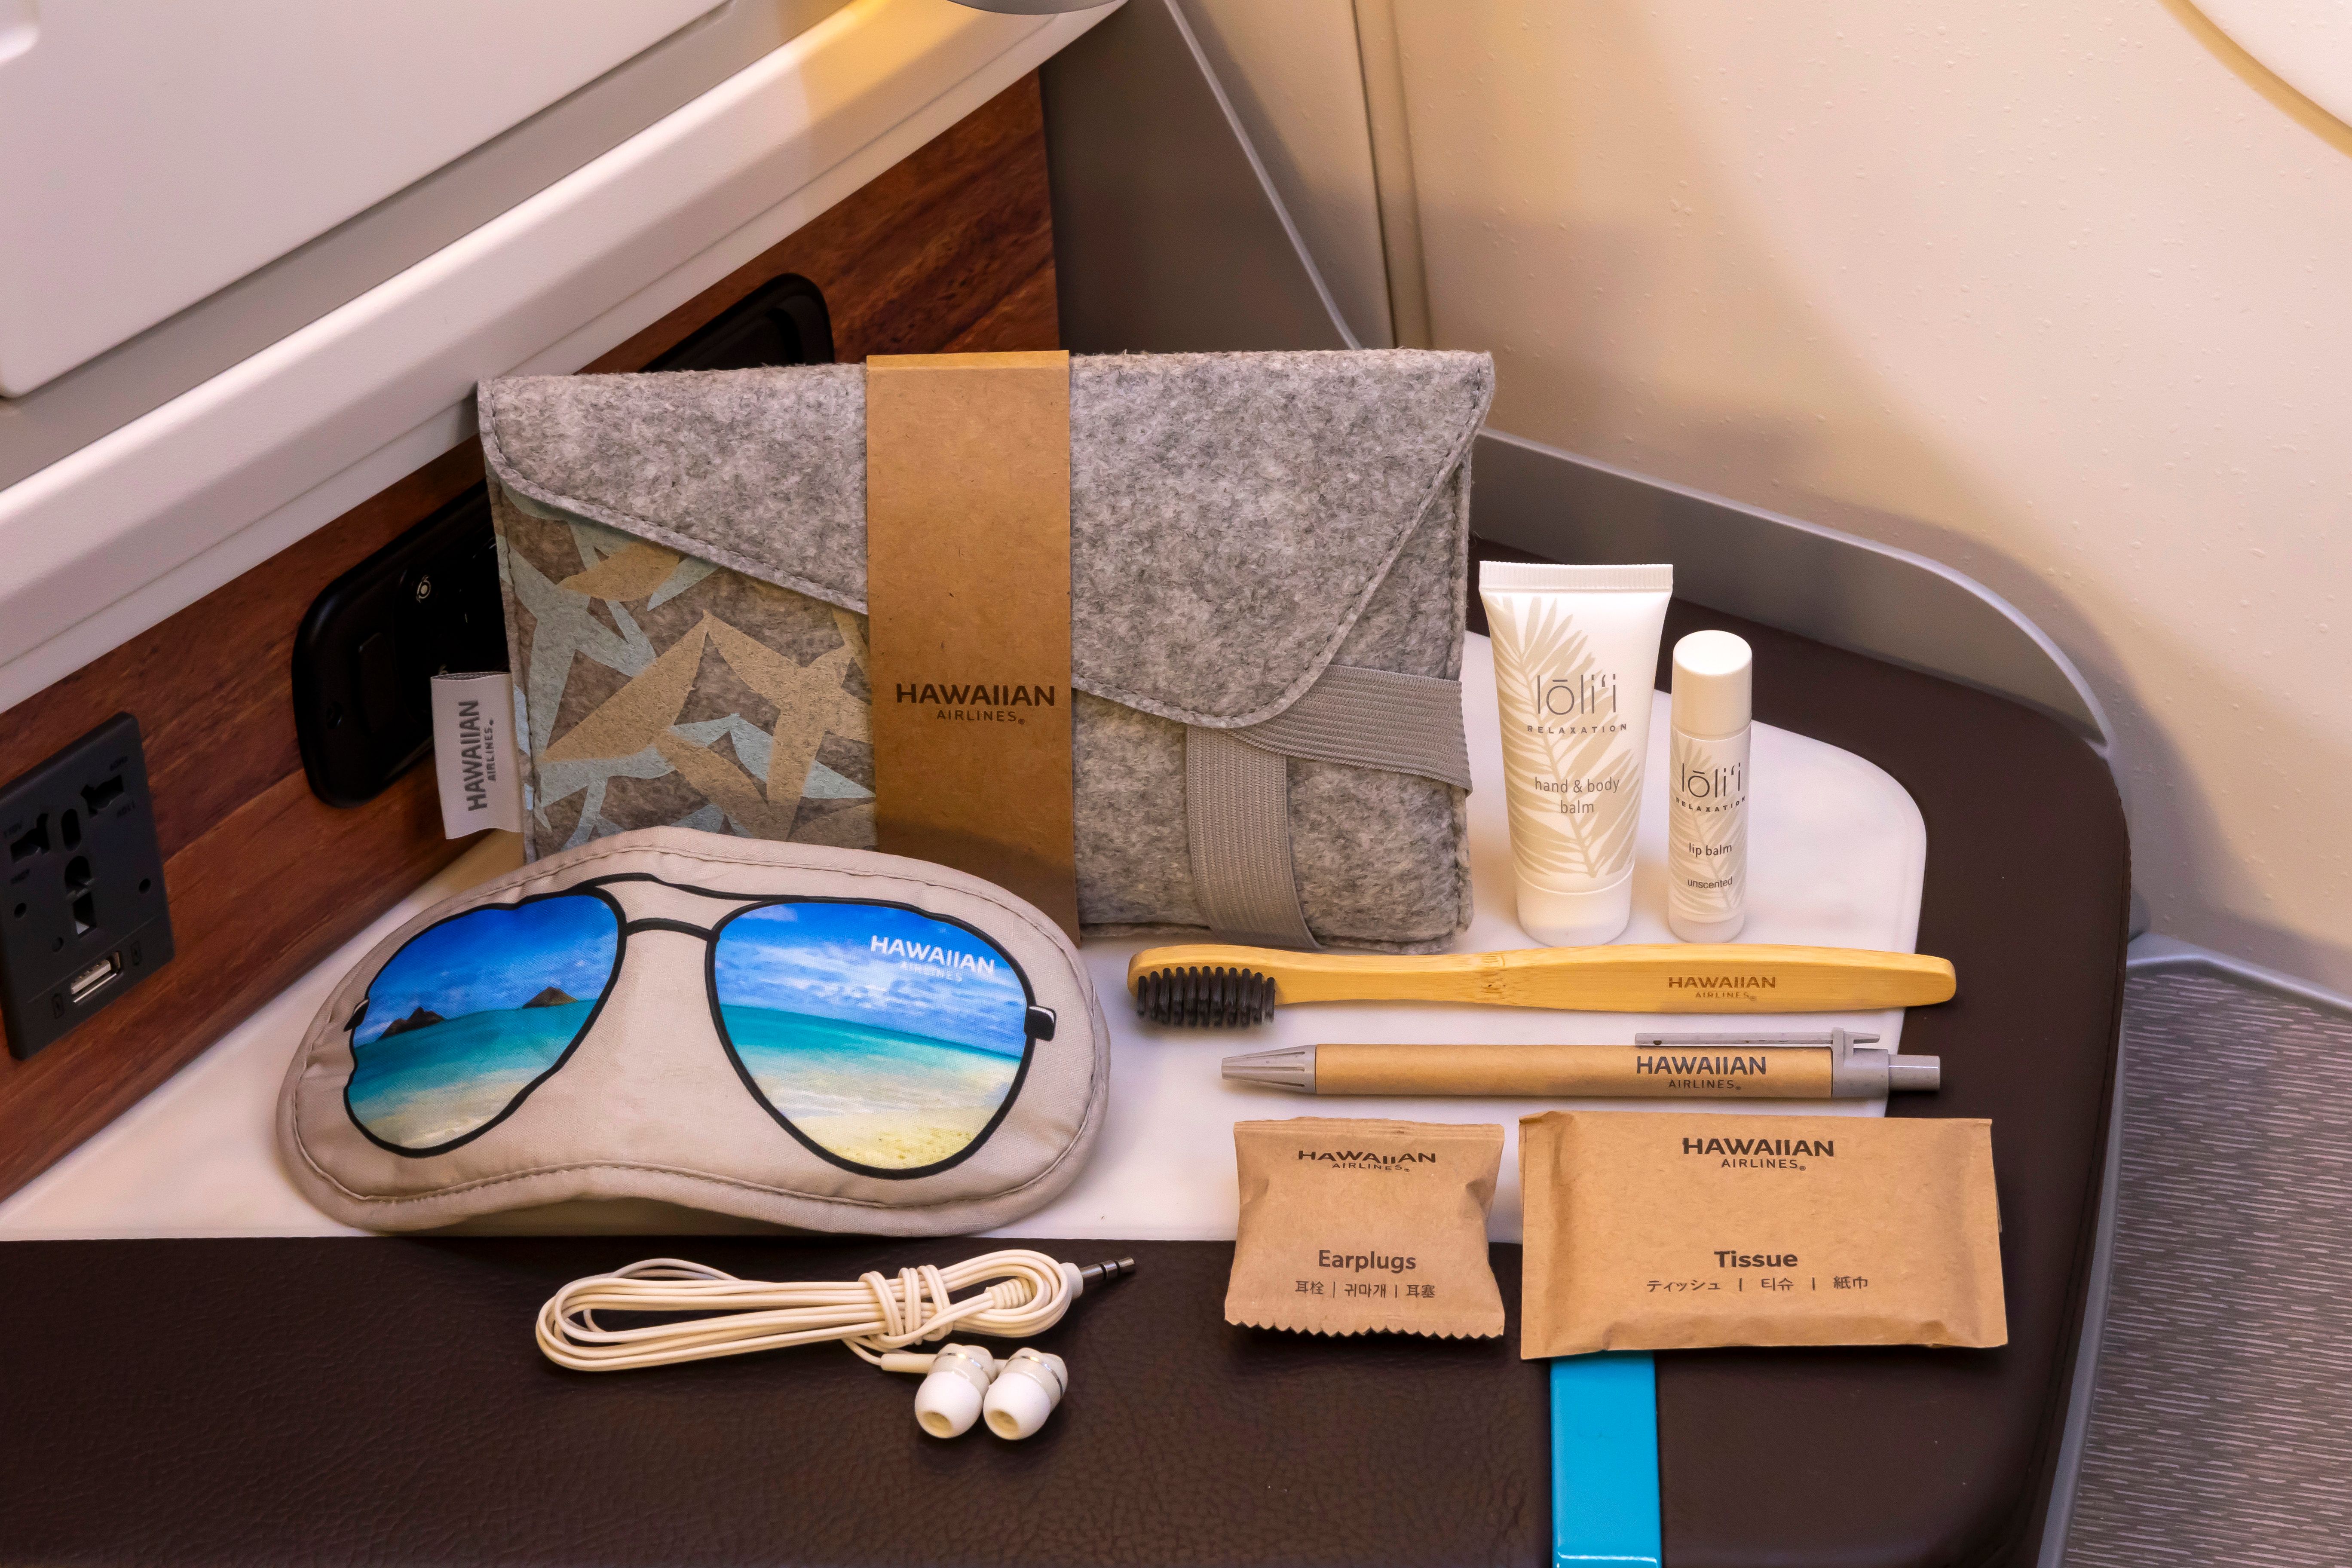 Hawaiian Airlines & Noho Home Extra Comfort amenity kit features the Lele design